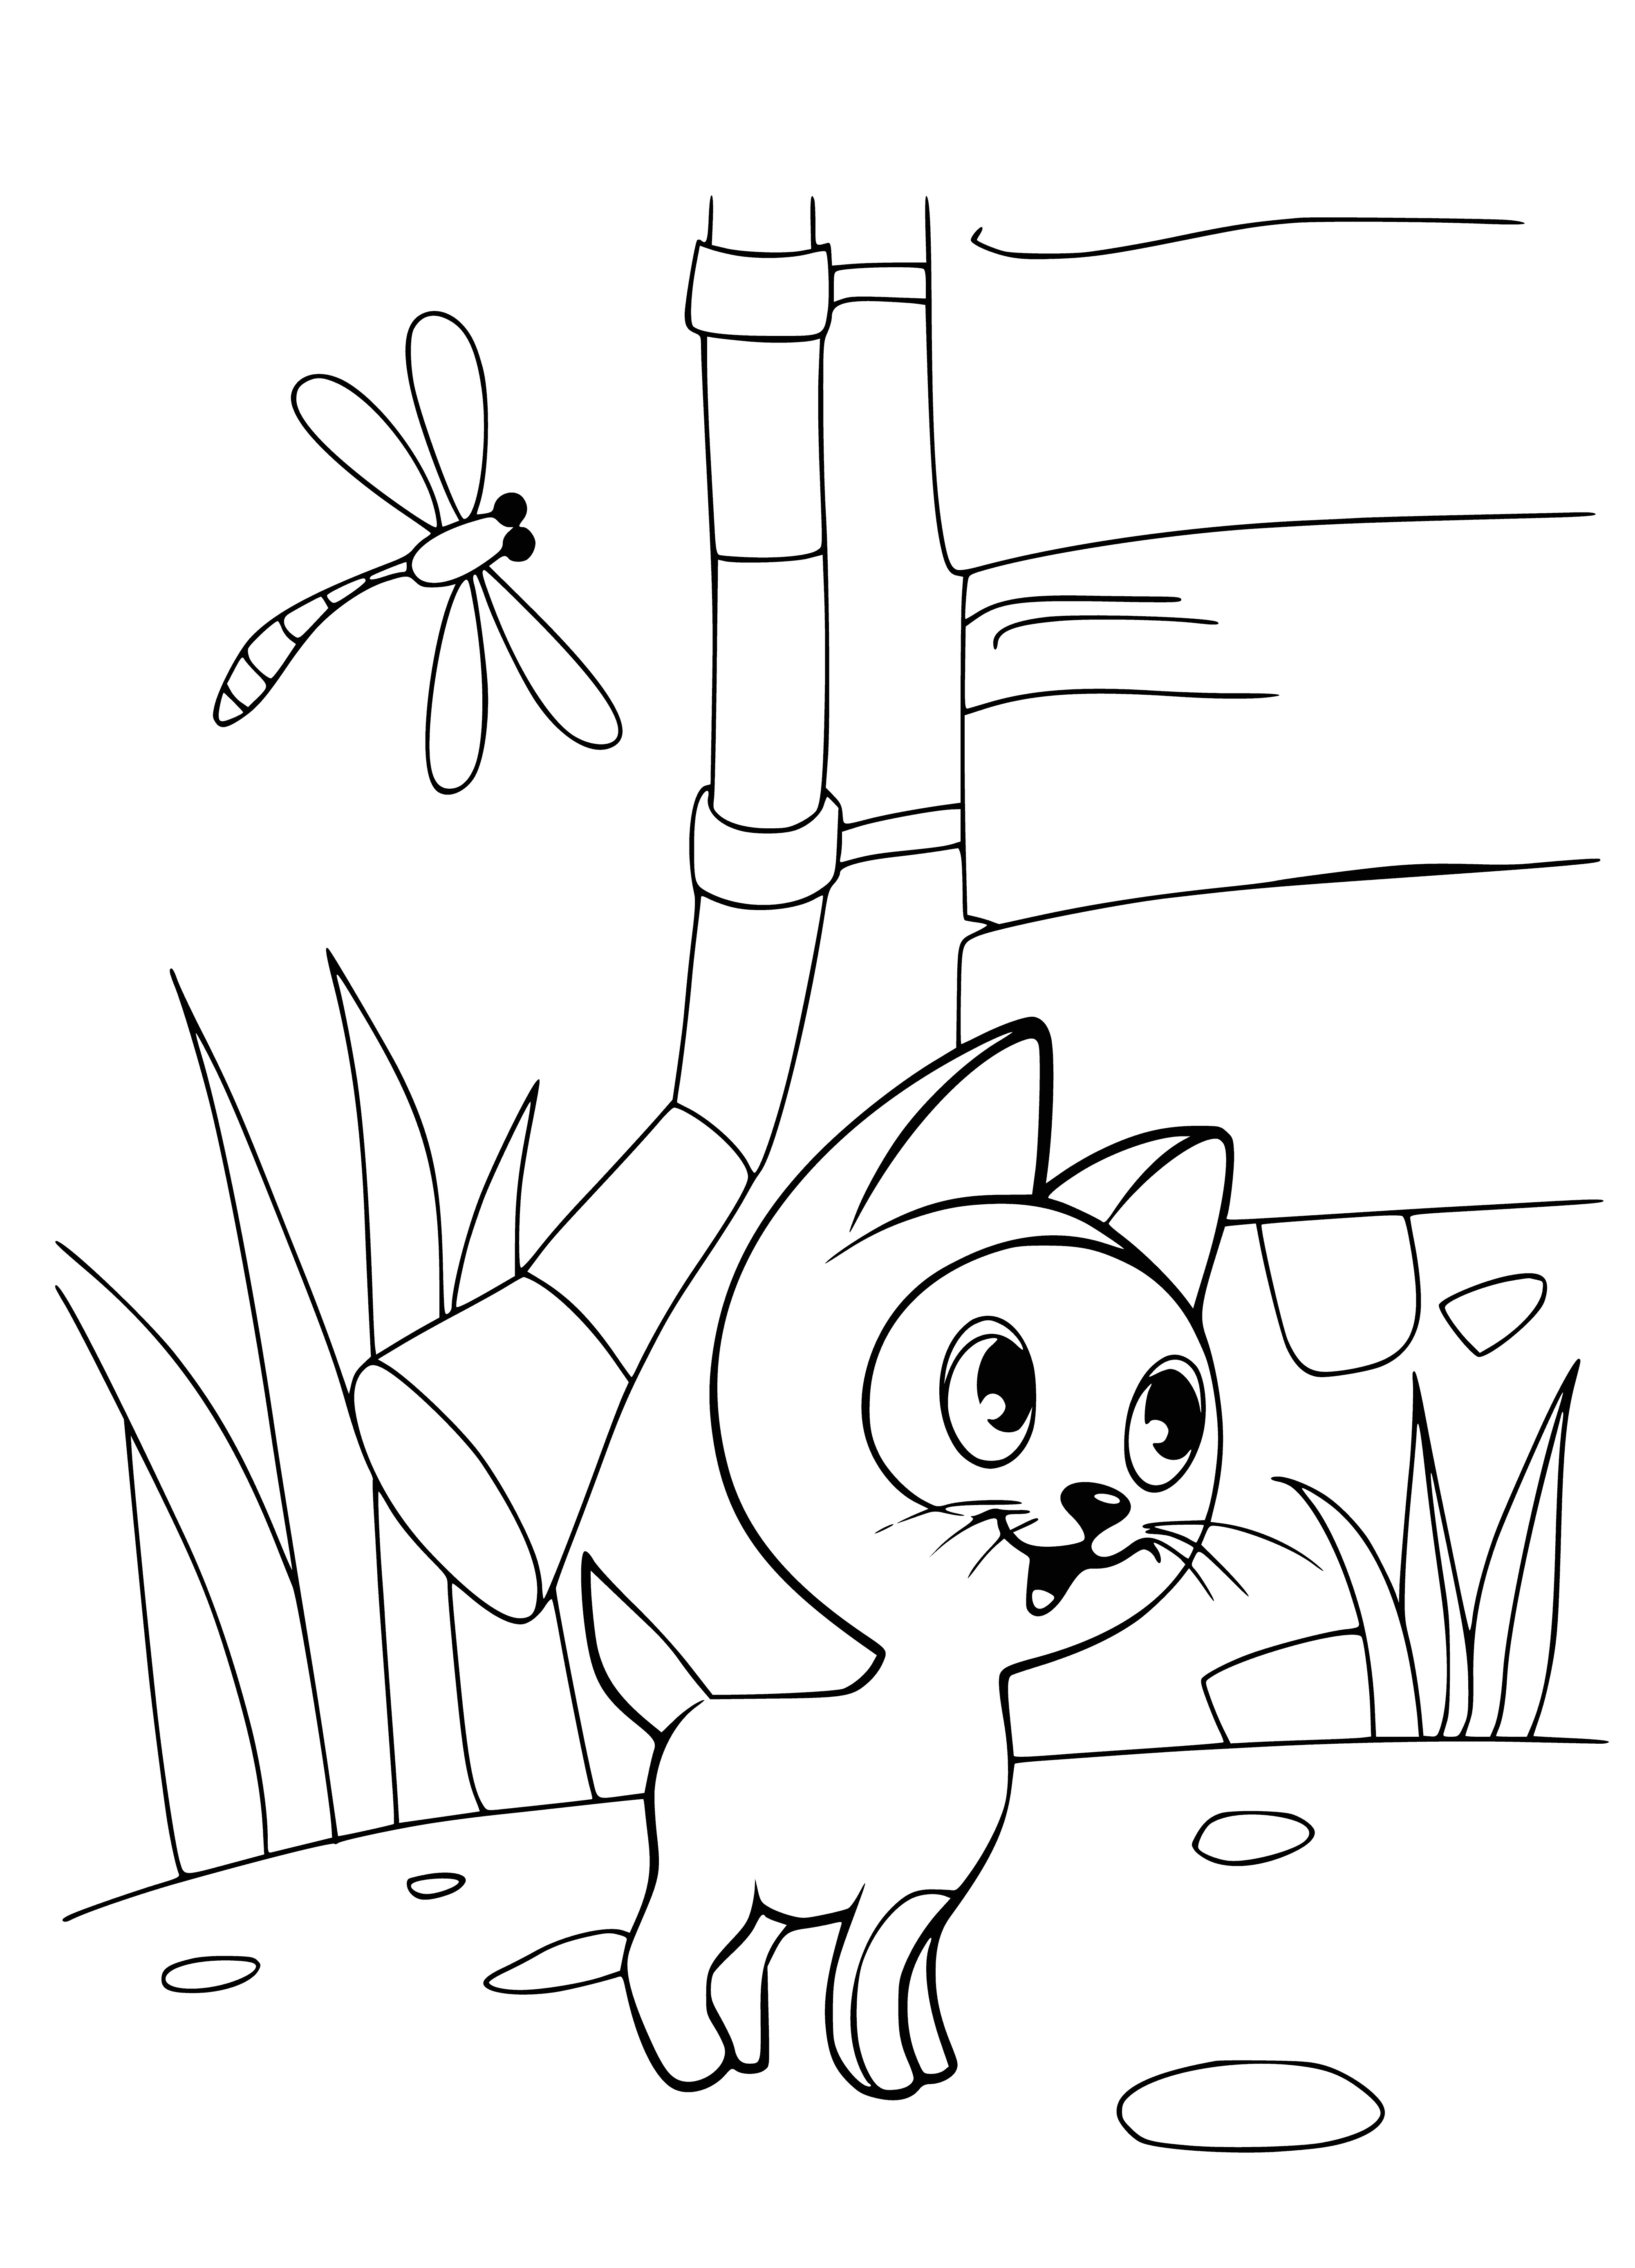 coloring page: Adorable ginger kitten with big green eyes and soft, fluffy fur - I could cuddle it all day!